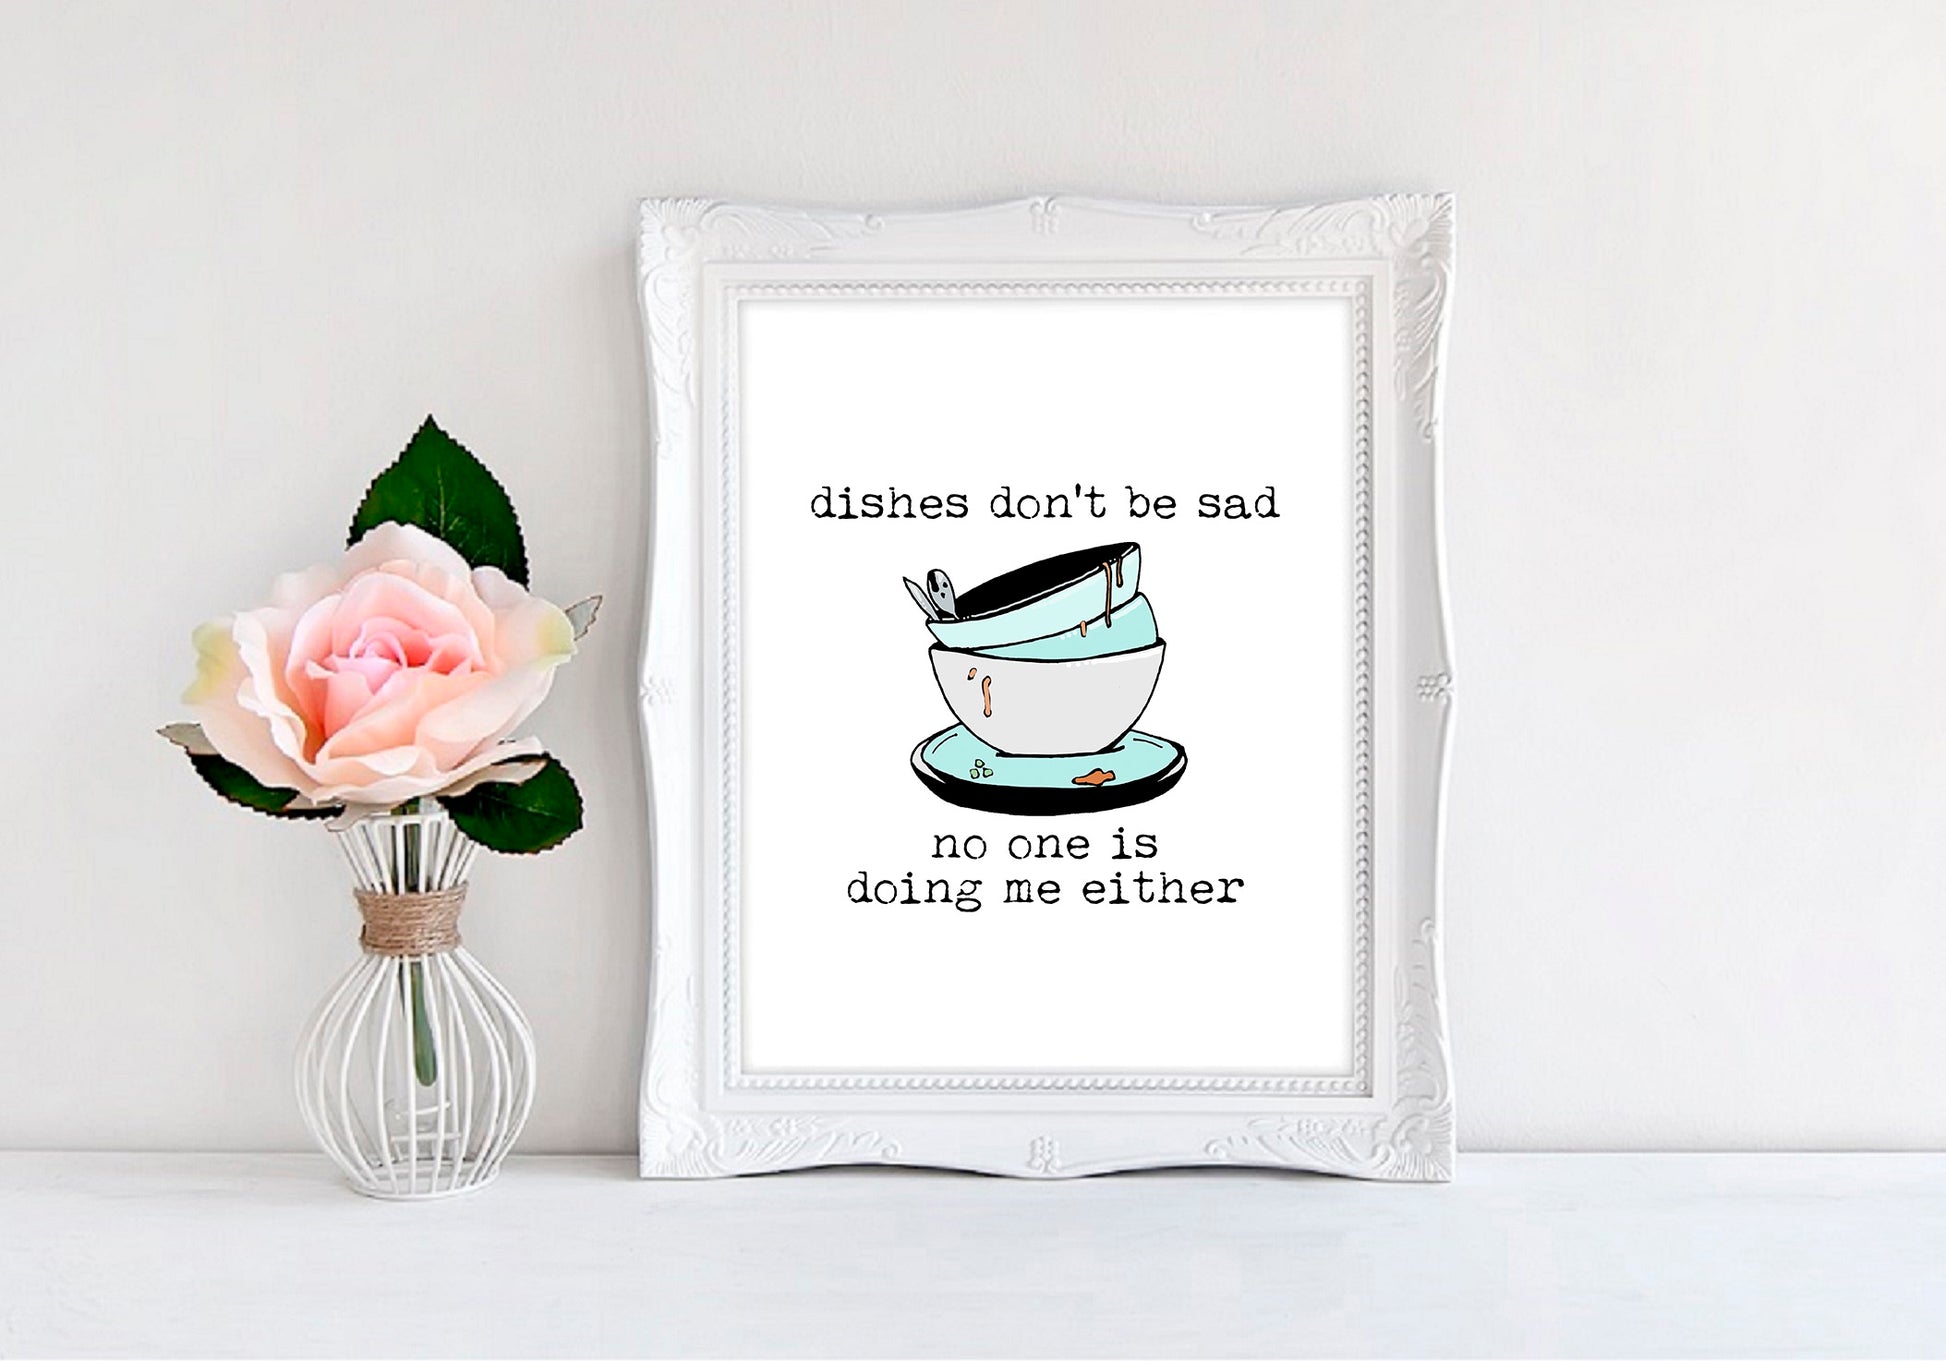 Dishes Don't Be Sad (No One Is Doing Me Either) - 8"x10" Wall Print - MoonlightMakers